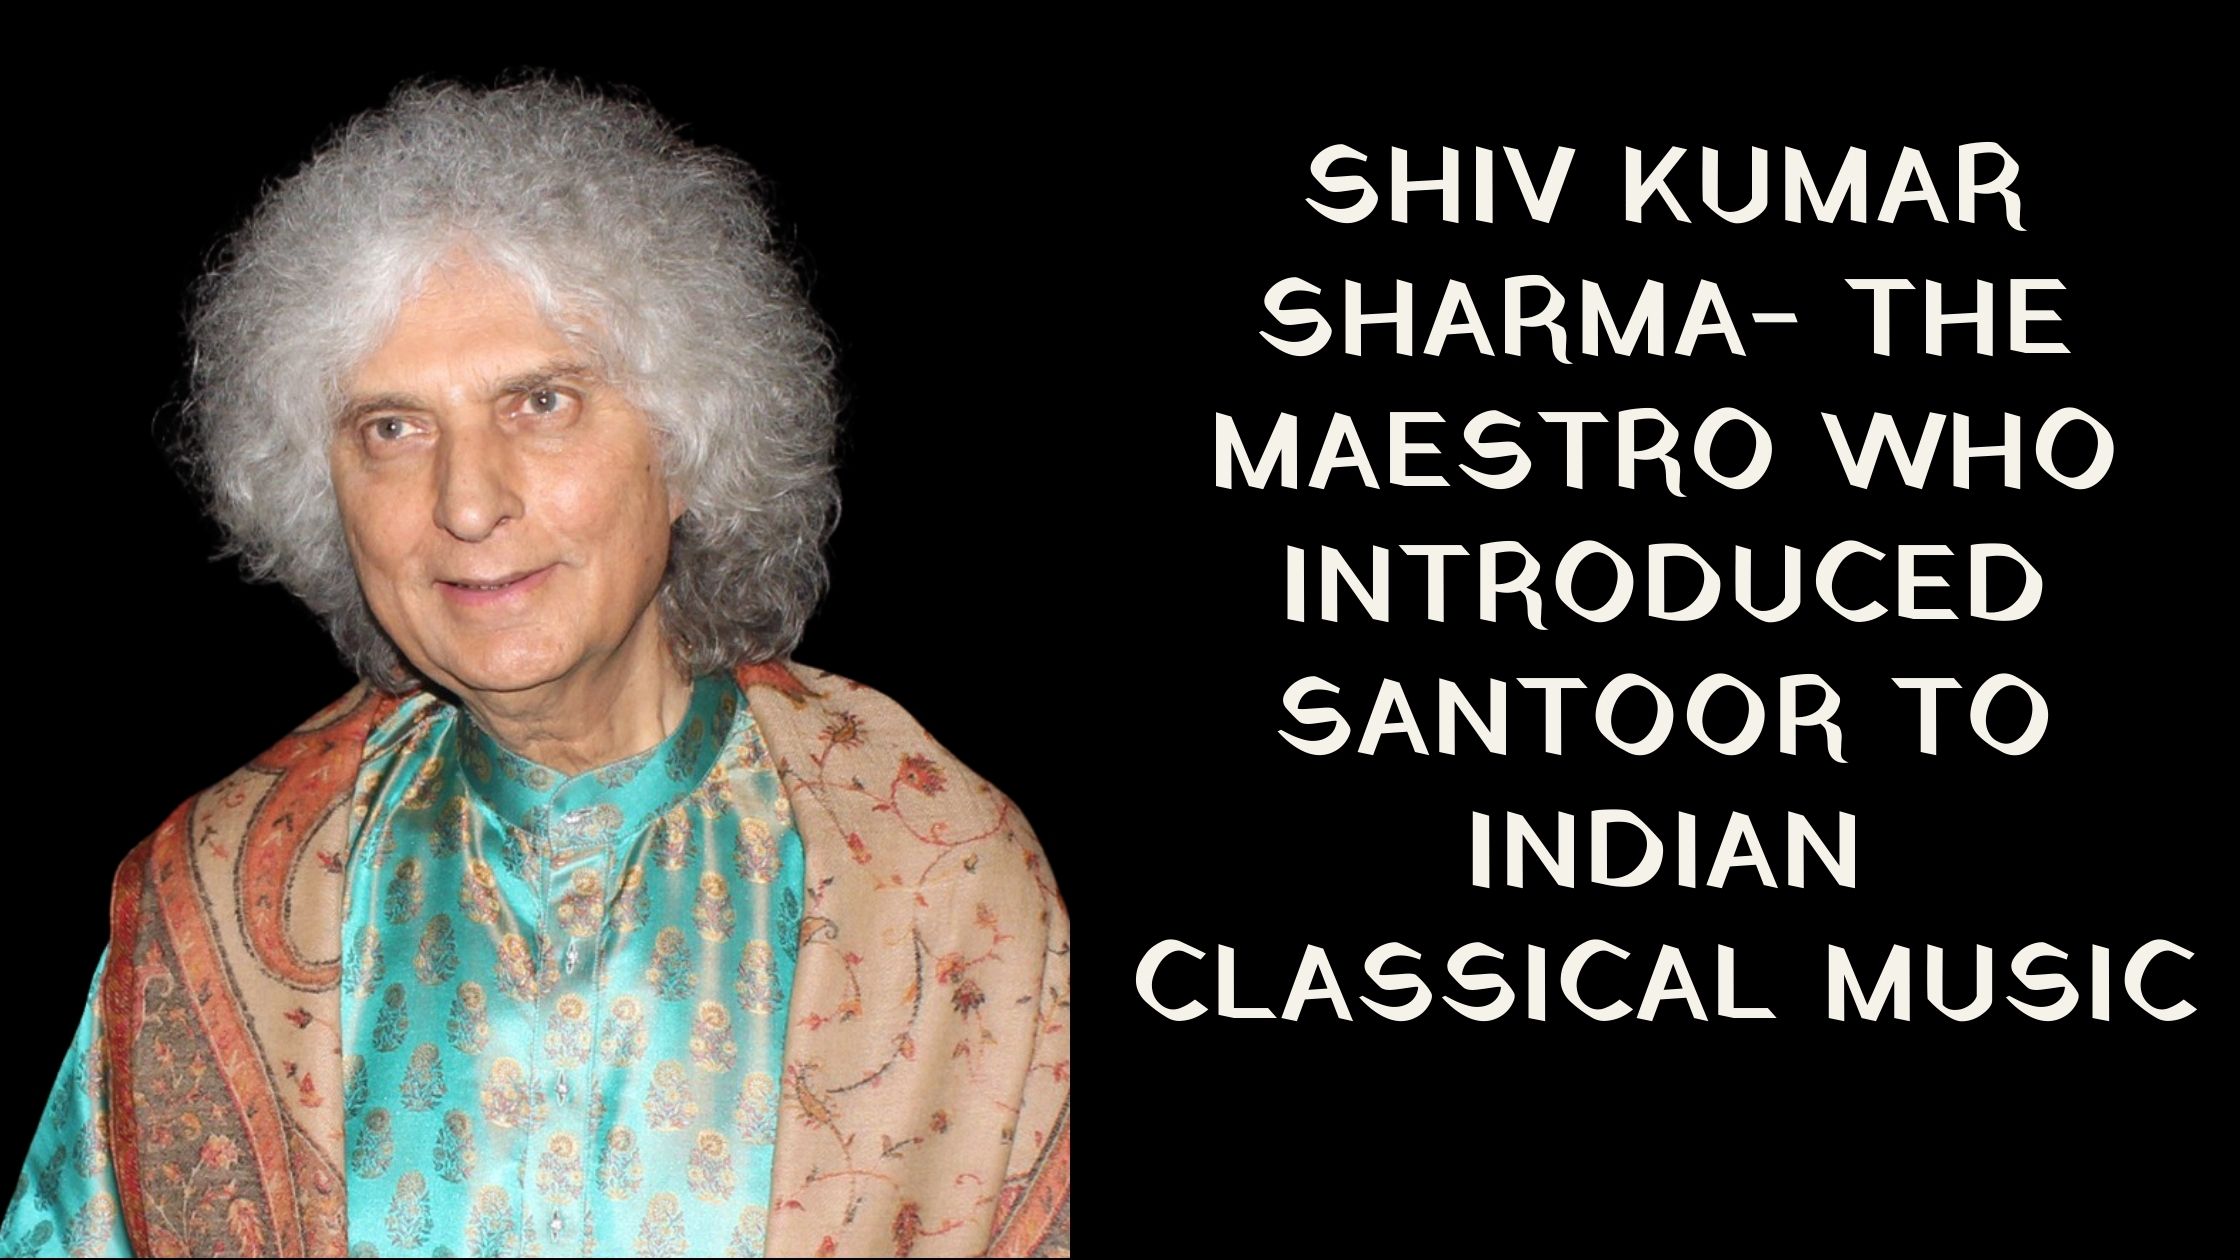 Shiv Kumar Sharma- the maestro who introduced Santoor to Indian classical music